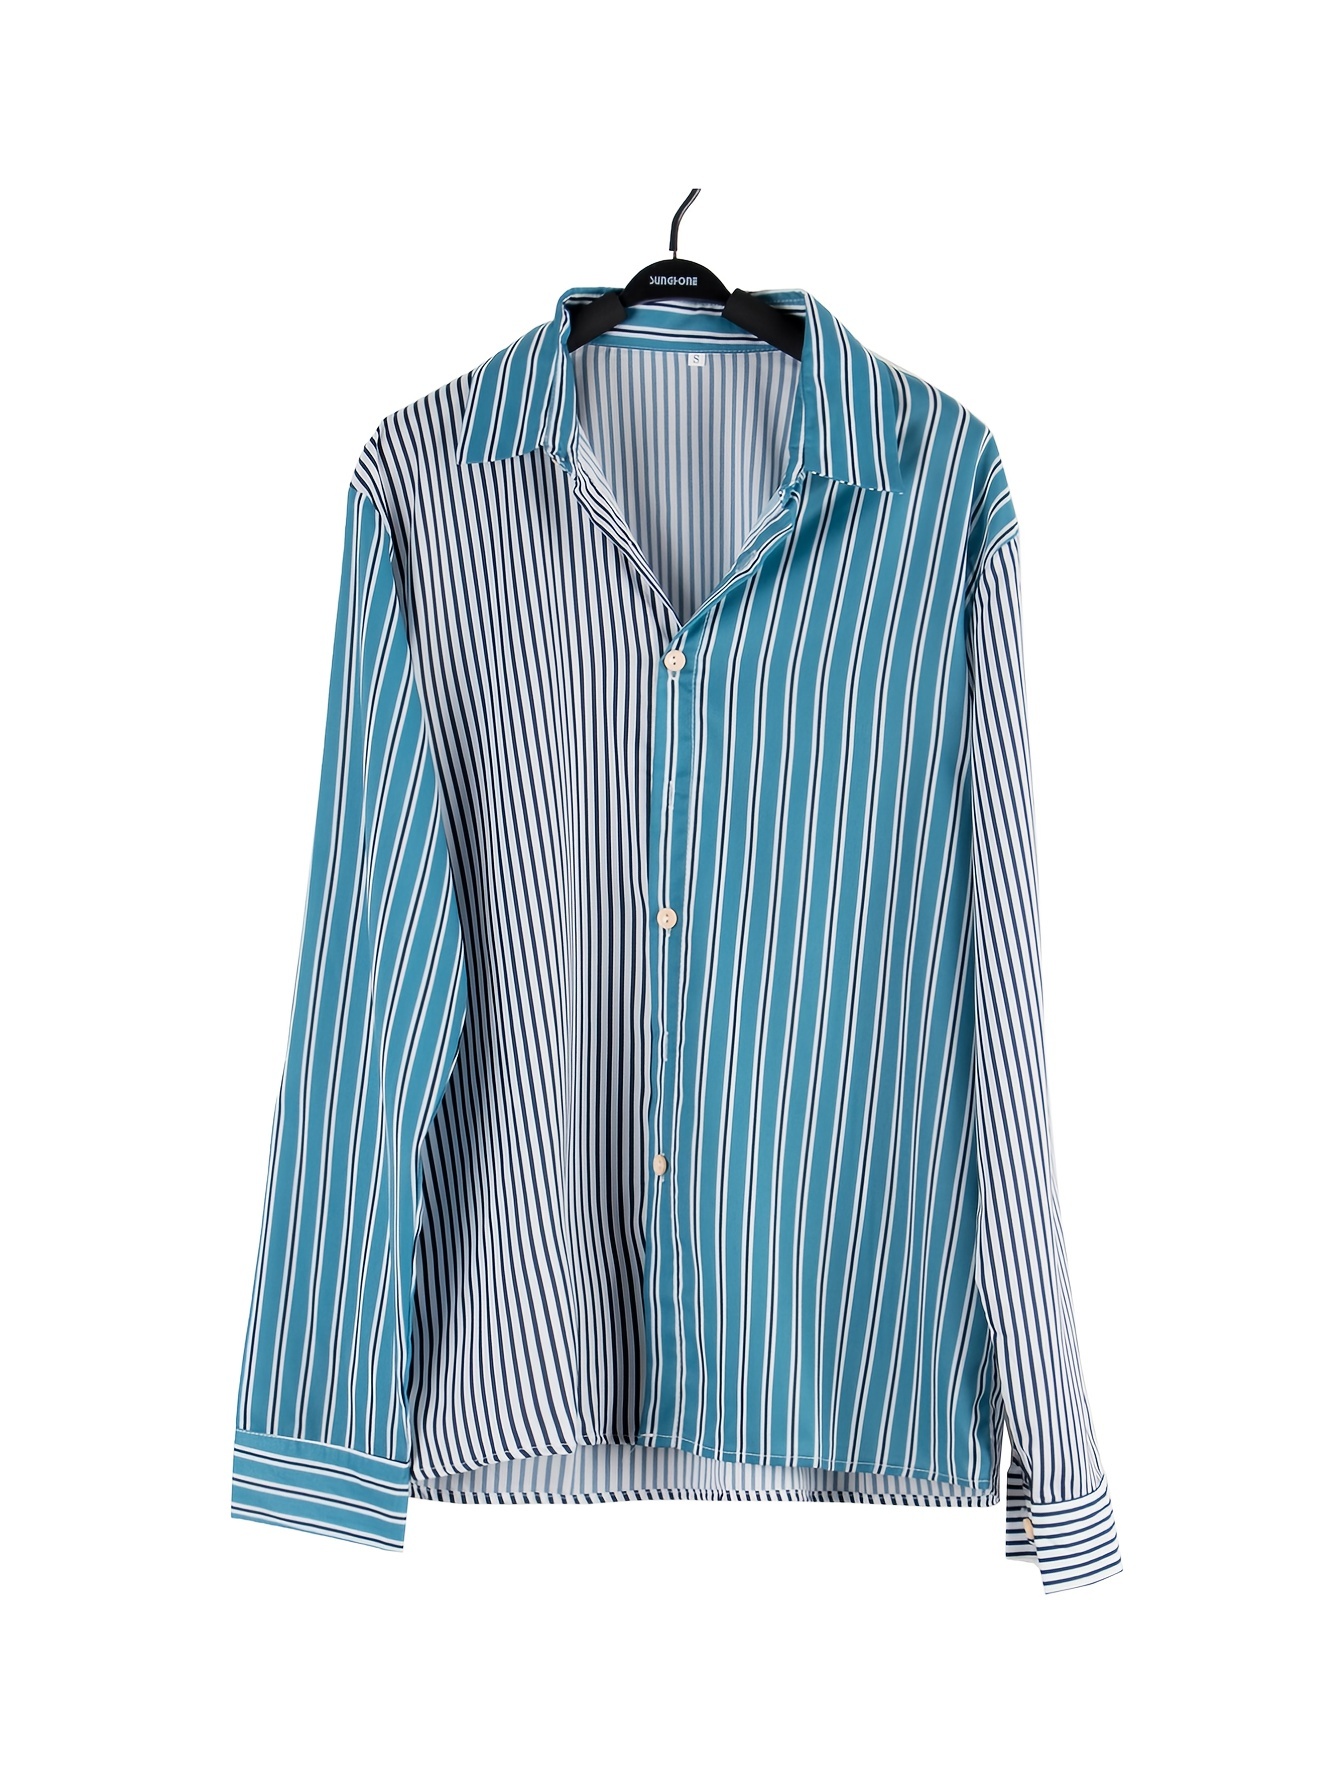 12m-3T Long Sleeve Cotton Shirt with pockets green/blue feathers, black  sleeves and stripes!